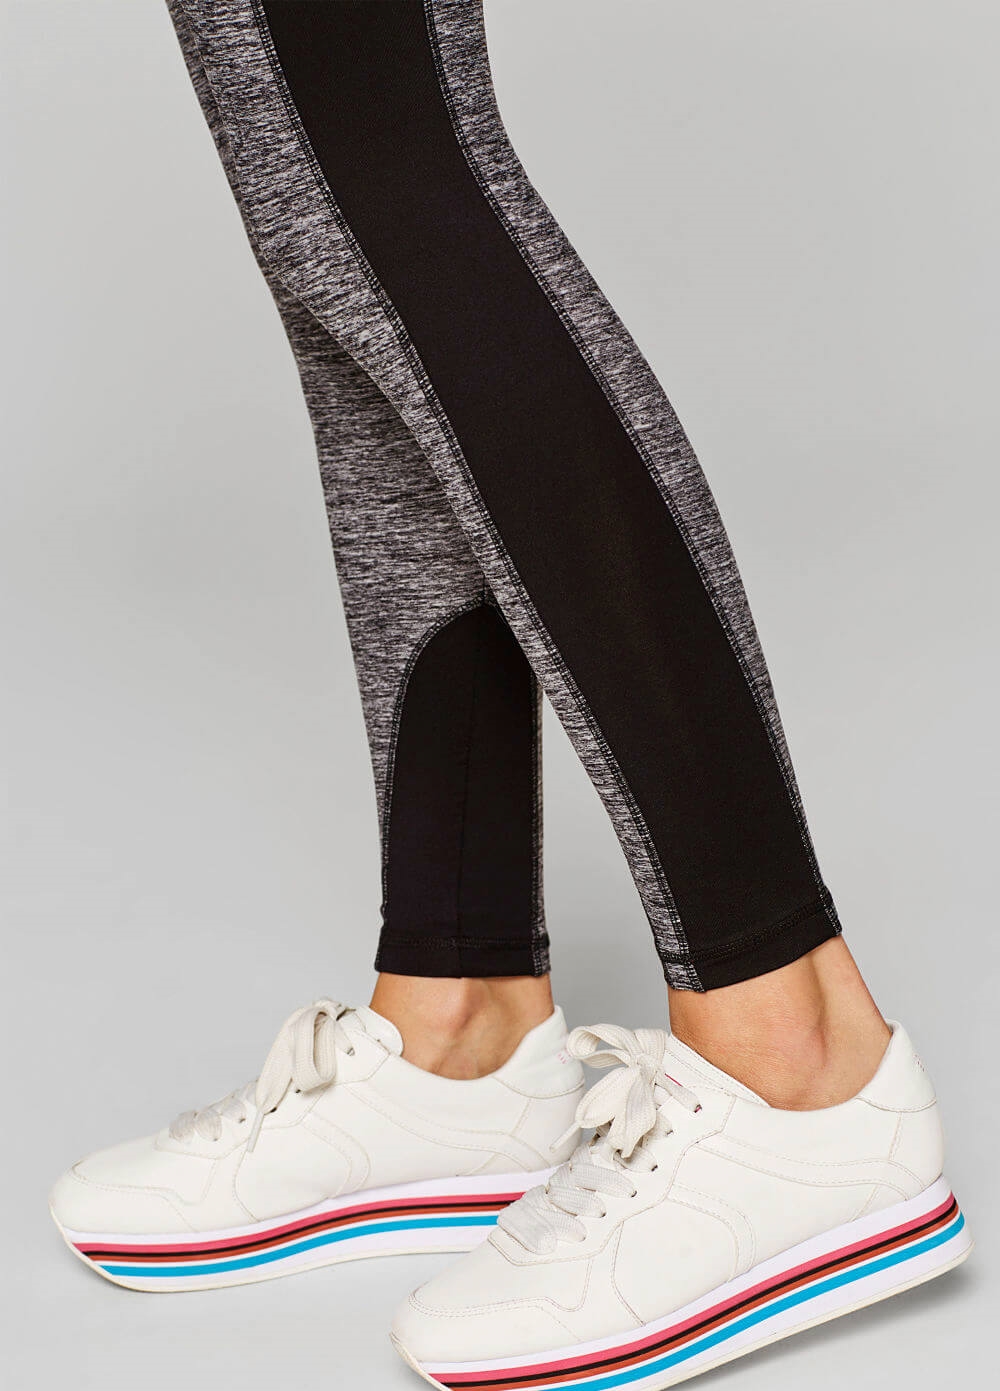 Maternity Active Sports Leggings in Black Marle by Esprit